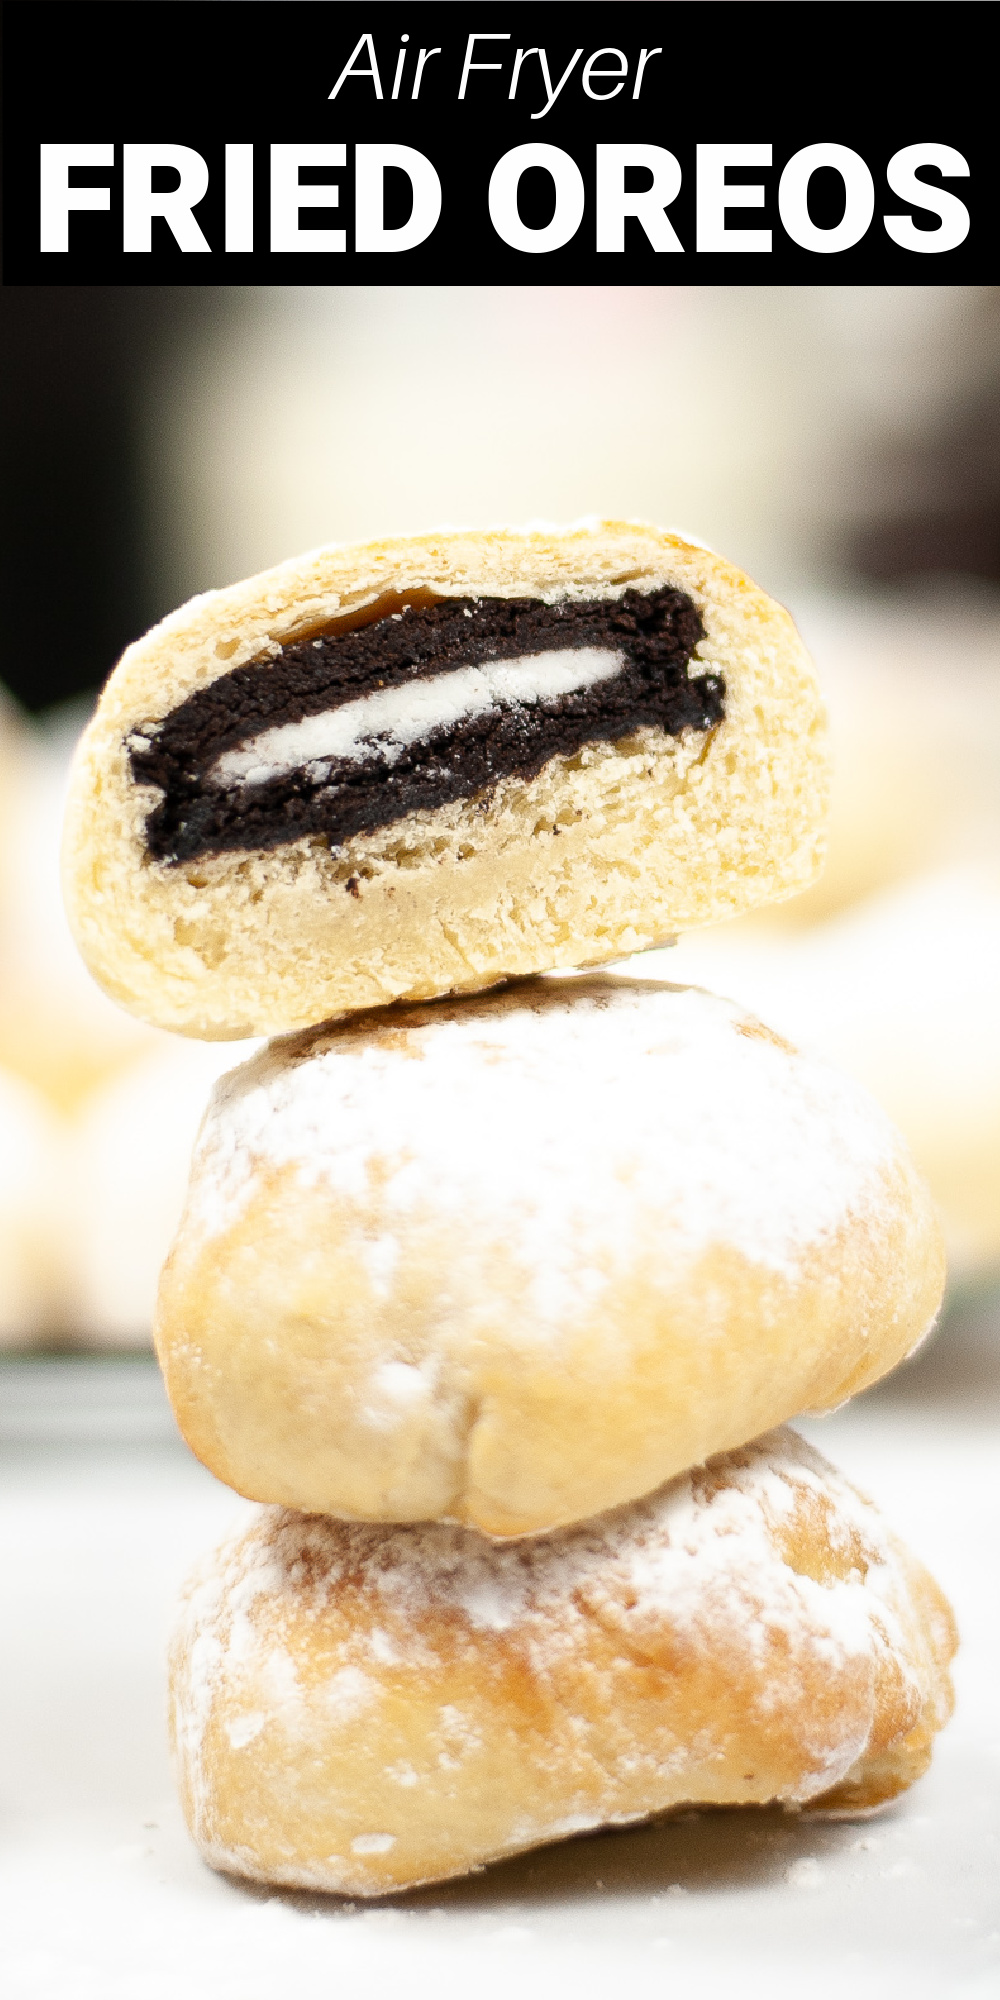 Air fried Oreos are an easy take on the classic fried Oreos you find at the fair! Oreos are dipped in a sweet batter then air fried and dusted with powdered sugar.